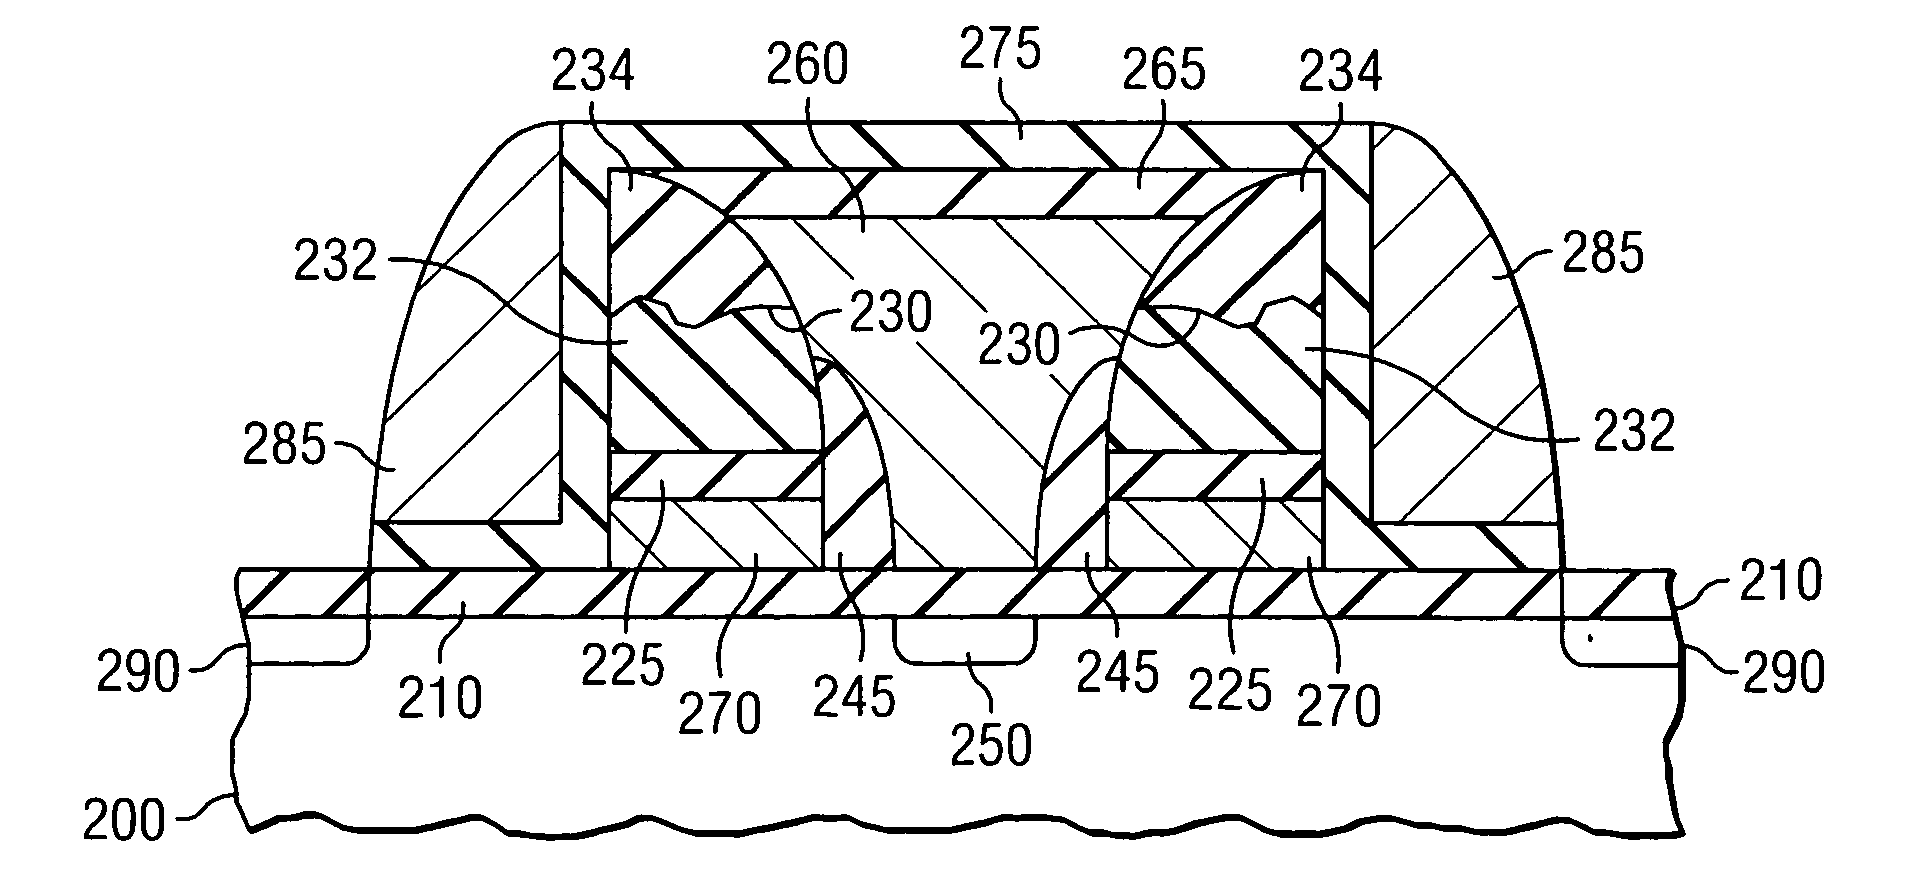 Spacer for a split gate flash memory cell and a memory cell employing the same